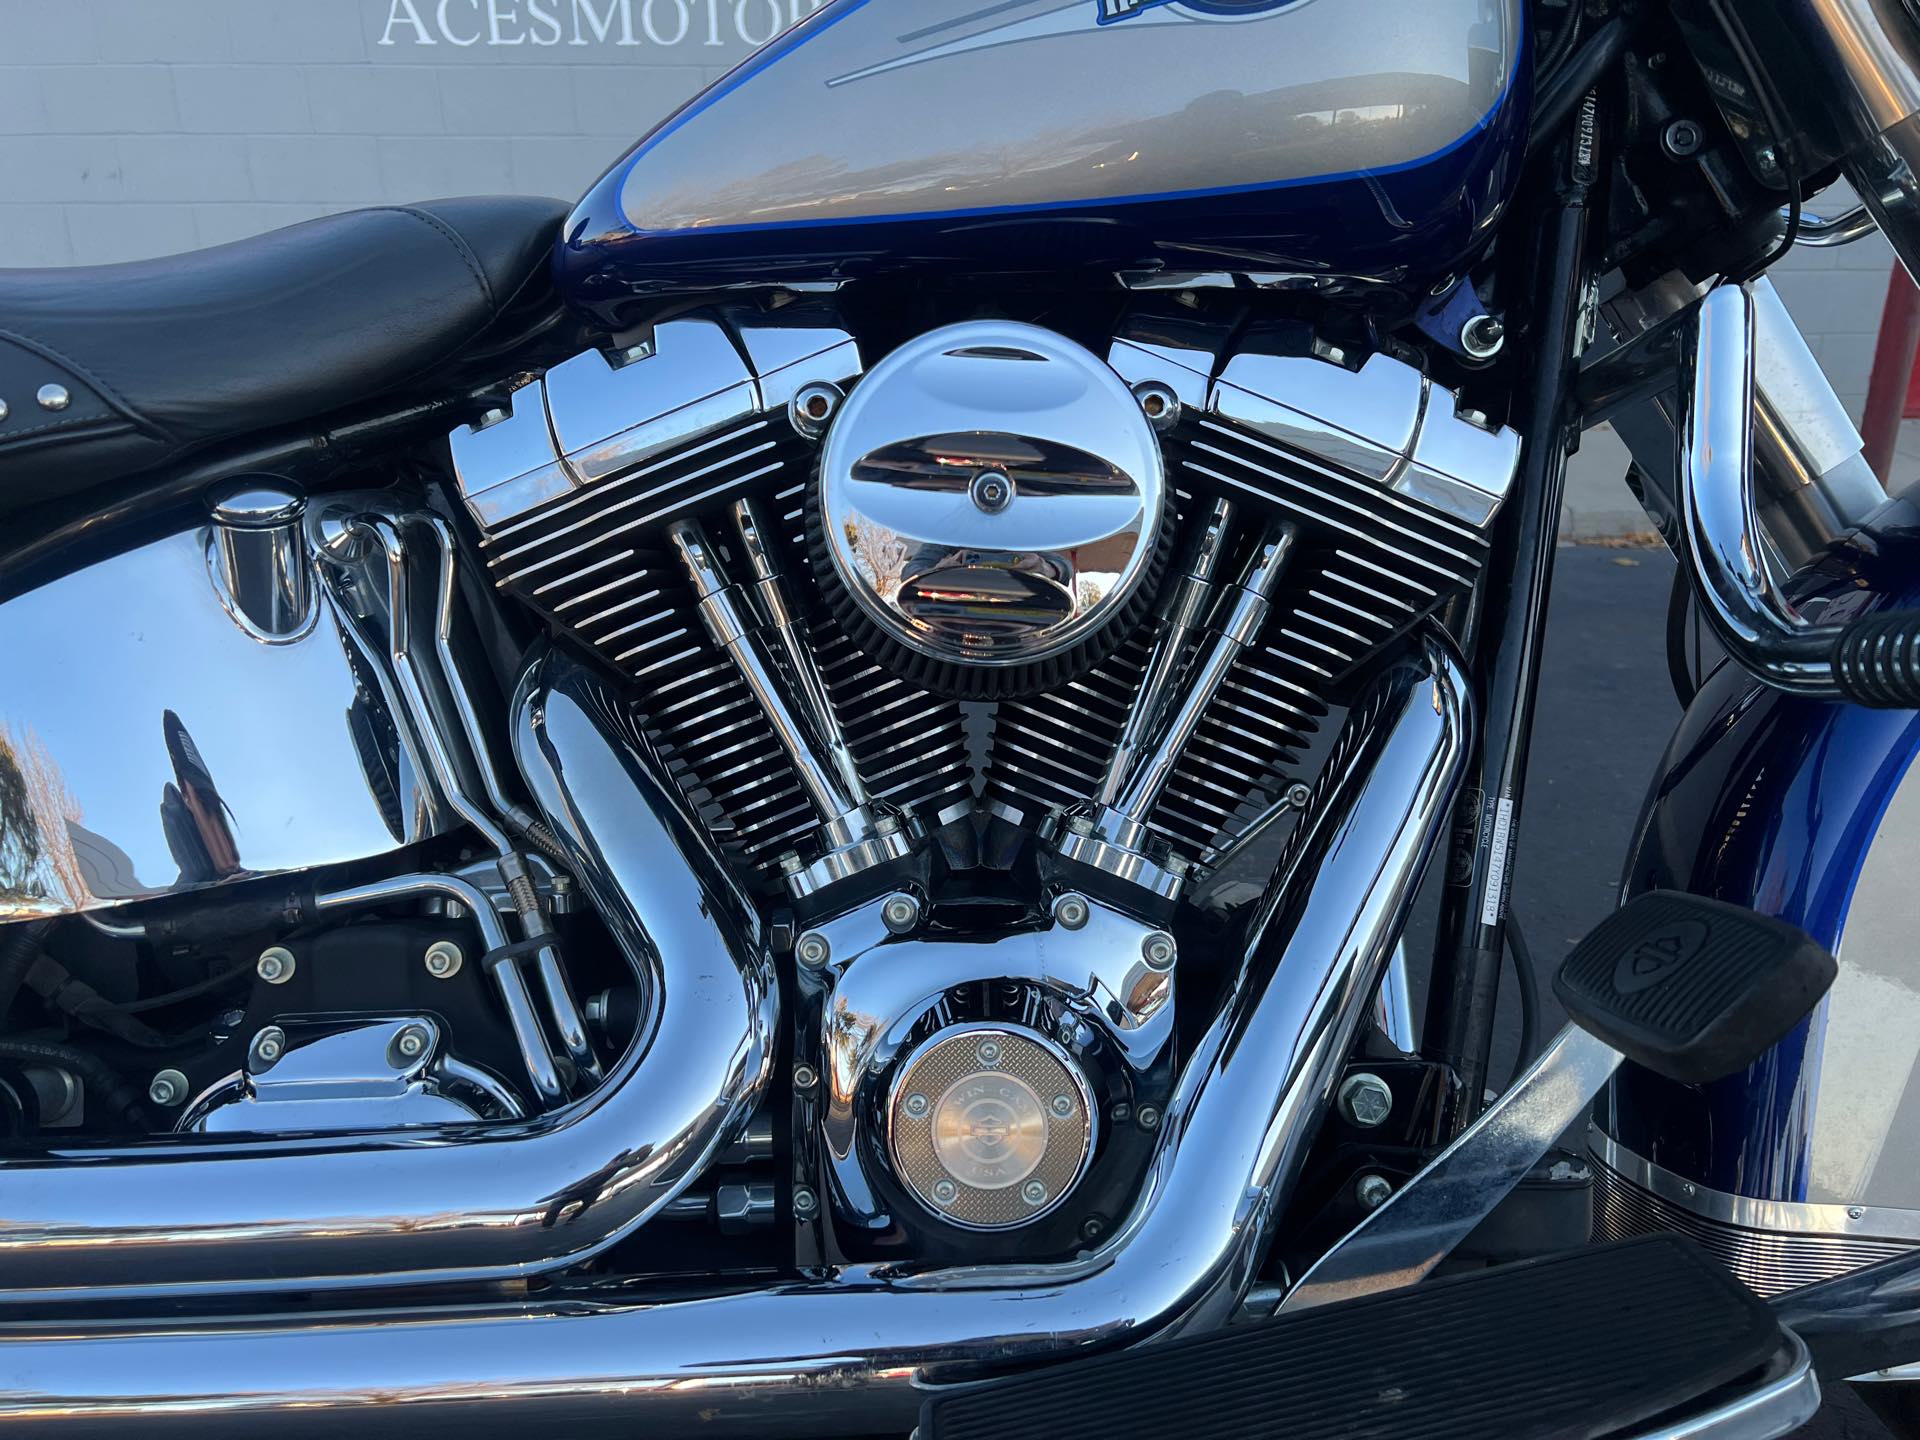 2007 Harley-Davidson Softail Heritage Softail Classic at Aces Motorcycles - Fort Collins